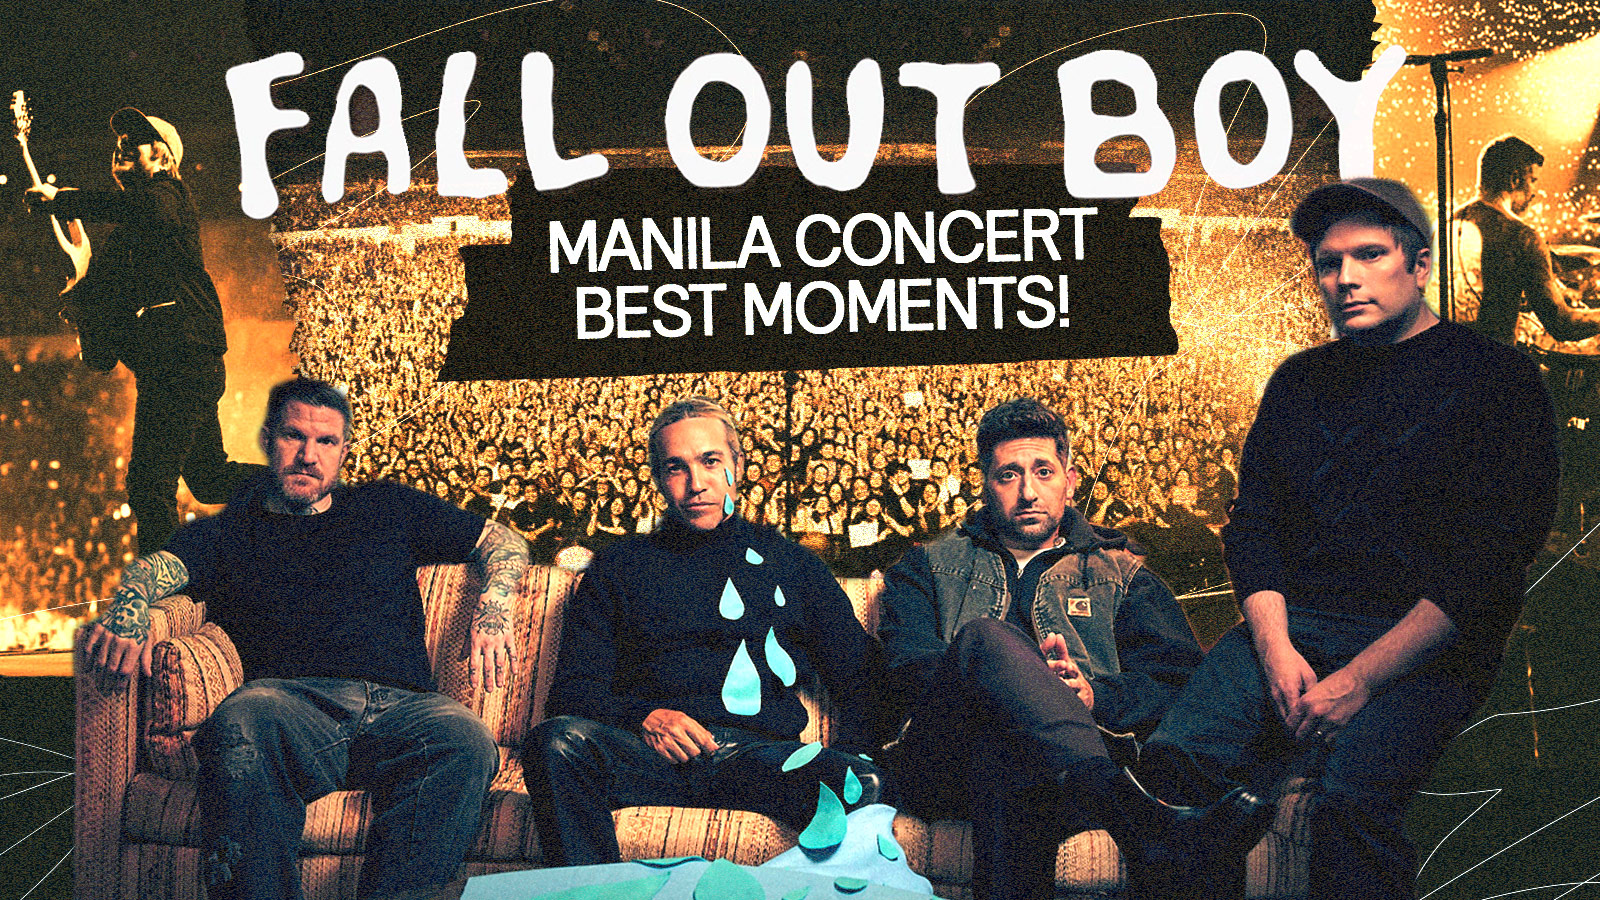 10 Of The Best Moments From Fall Out Boy Manila Concert So Much For (Tour) Dust That Was Worth The 10-Year Wait